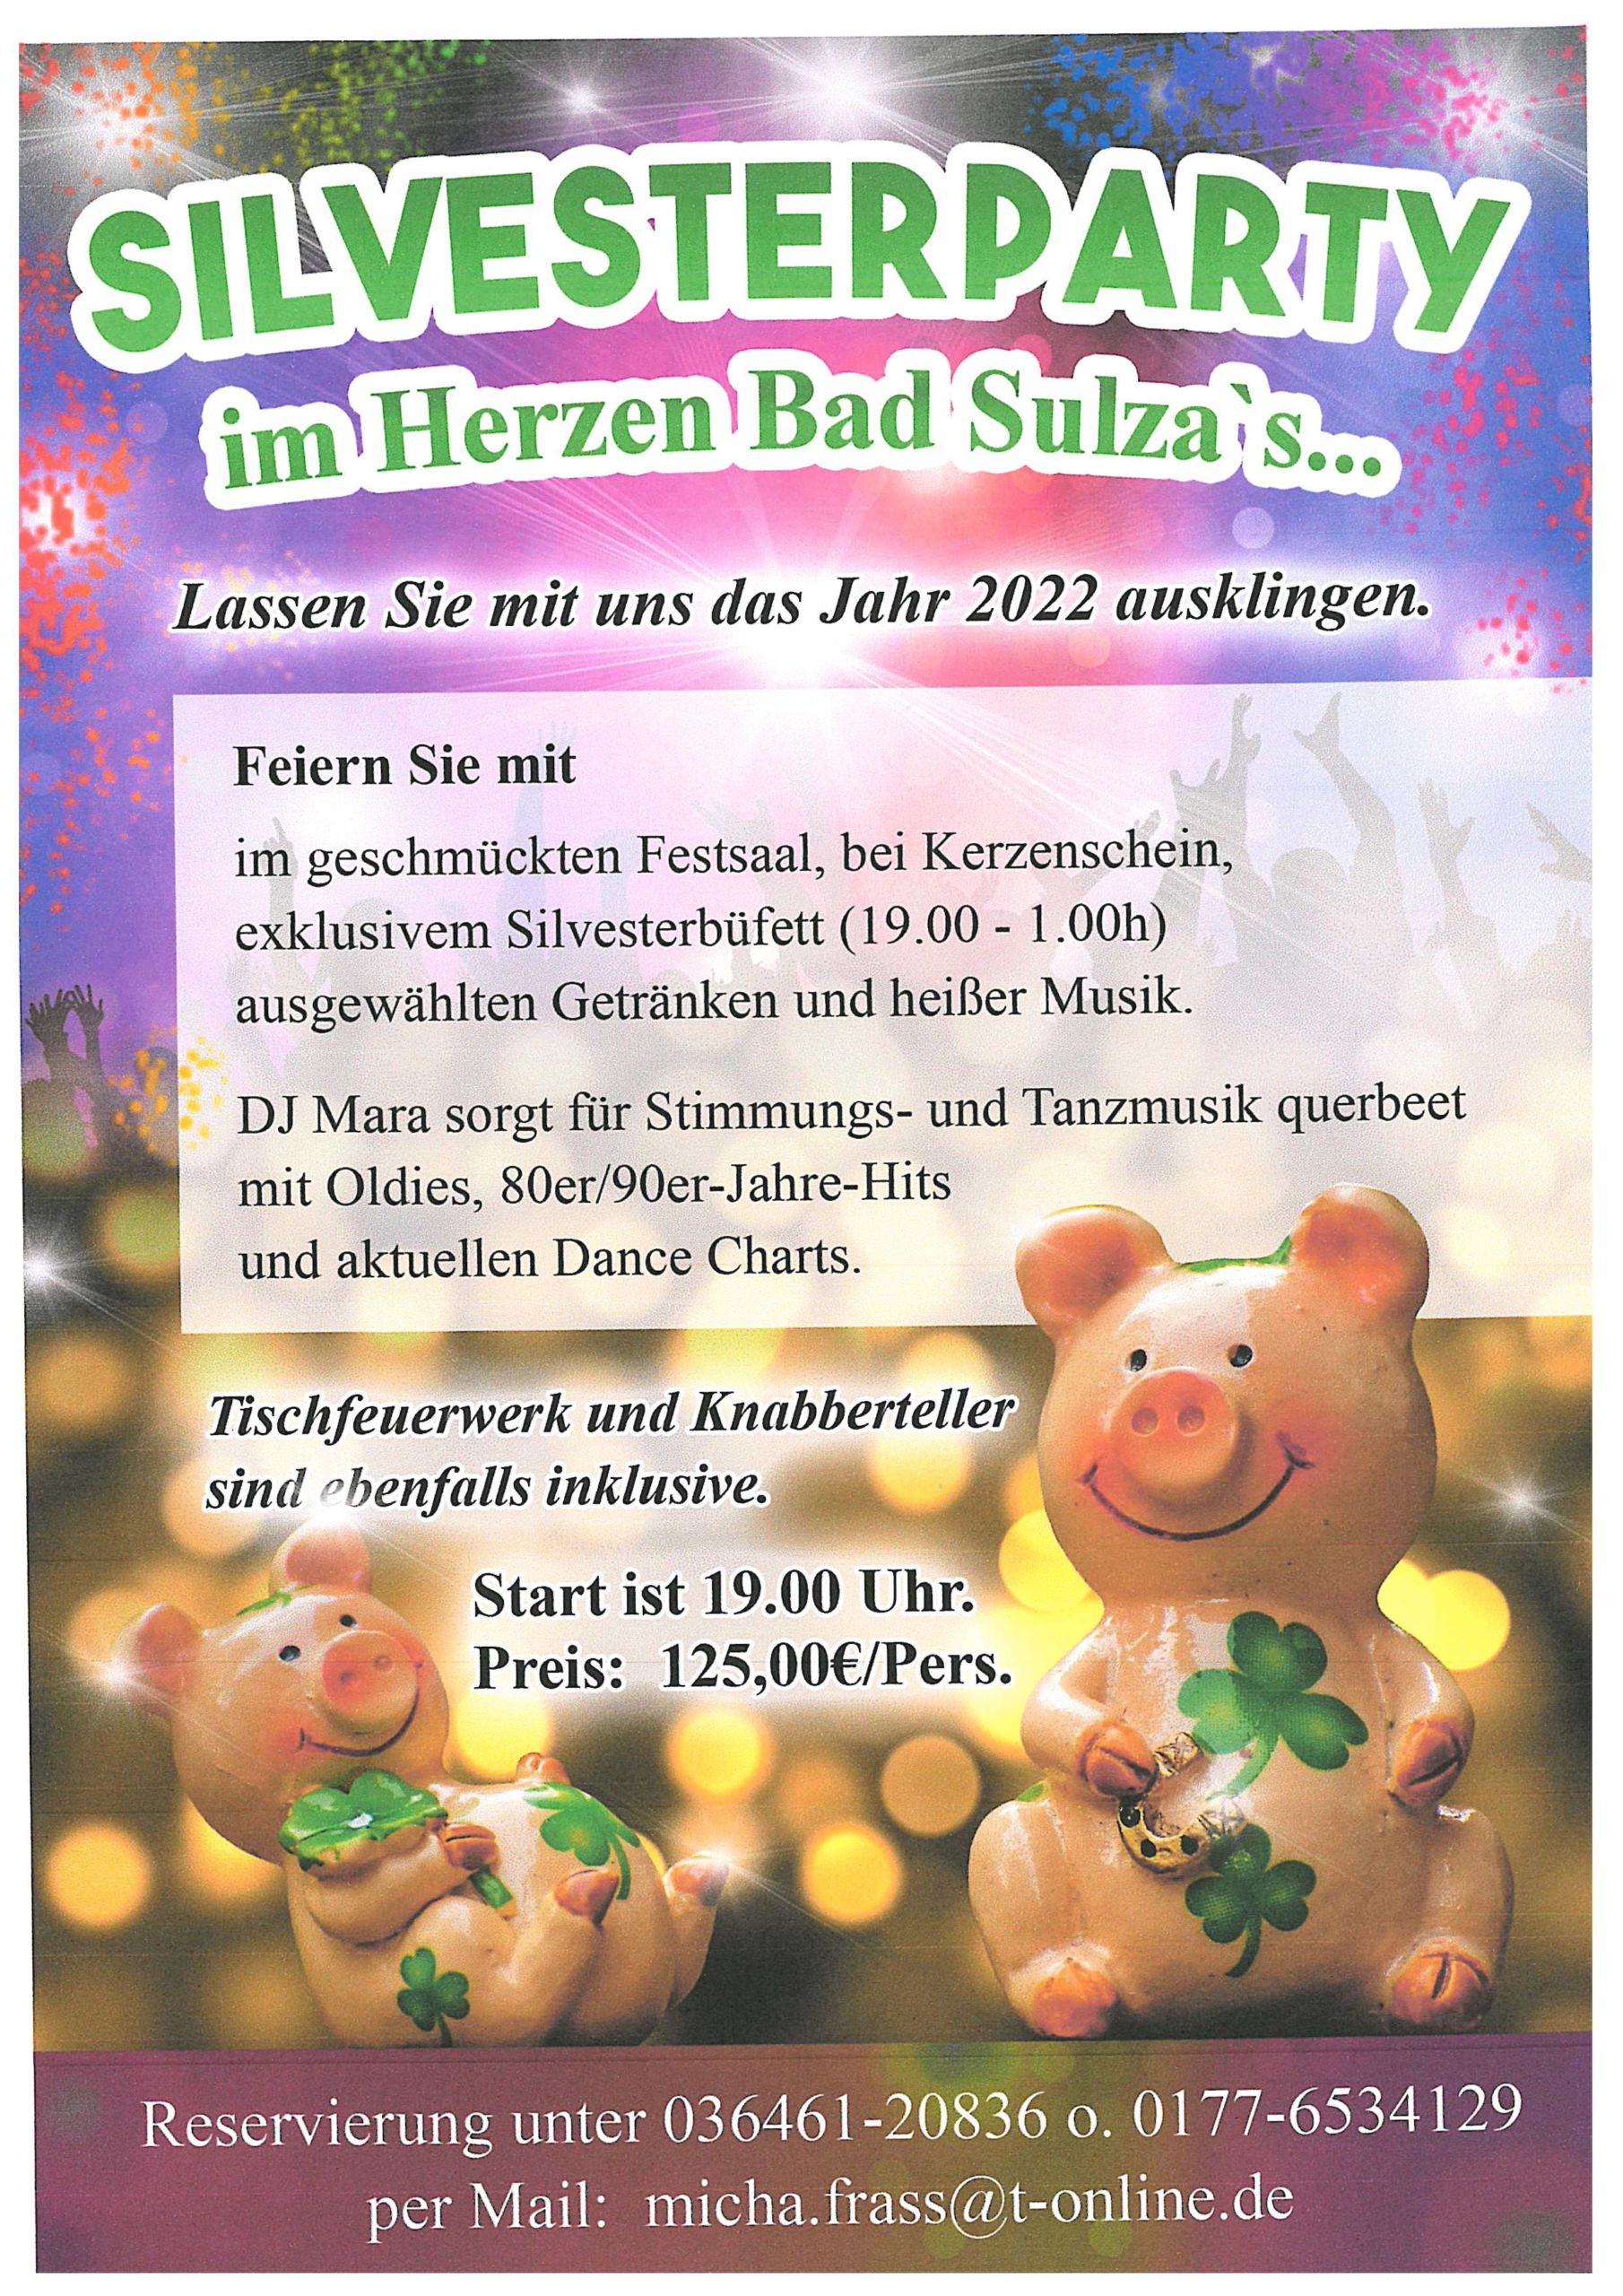 Silvesterparty_Gasthaus_Stadt_Bad_Sulza